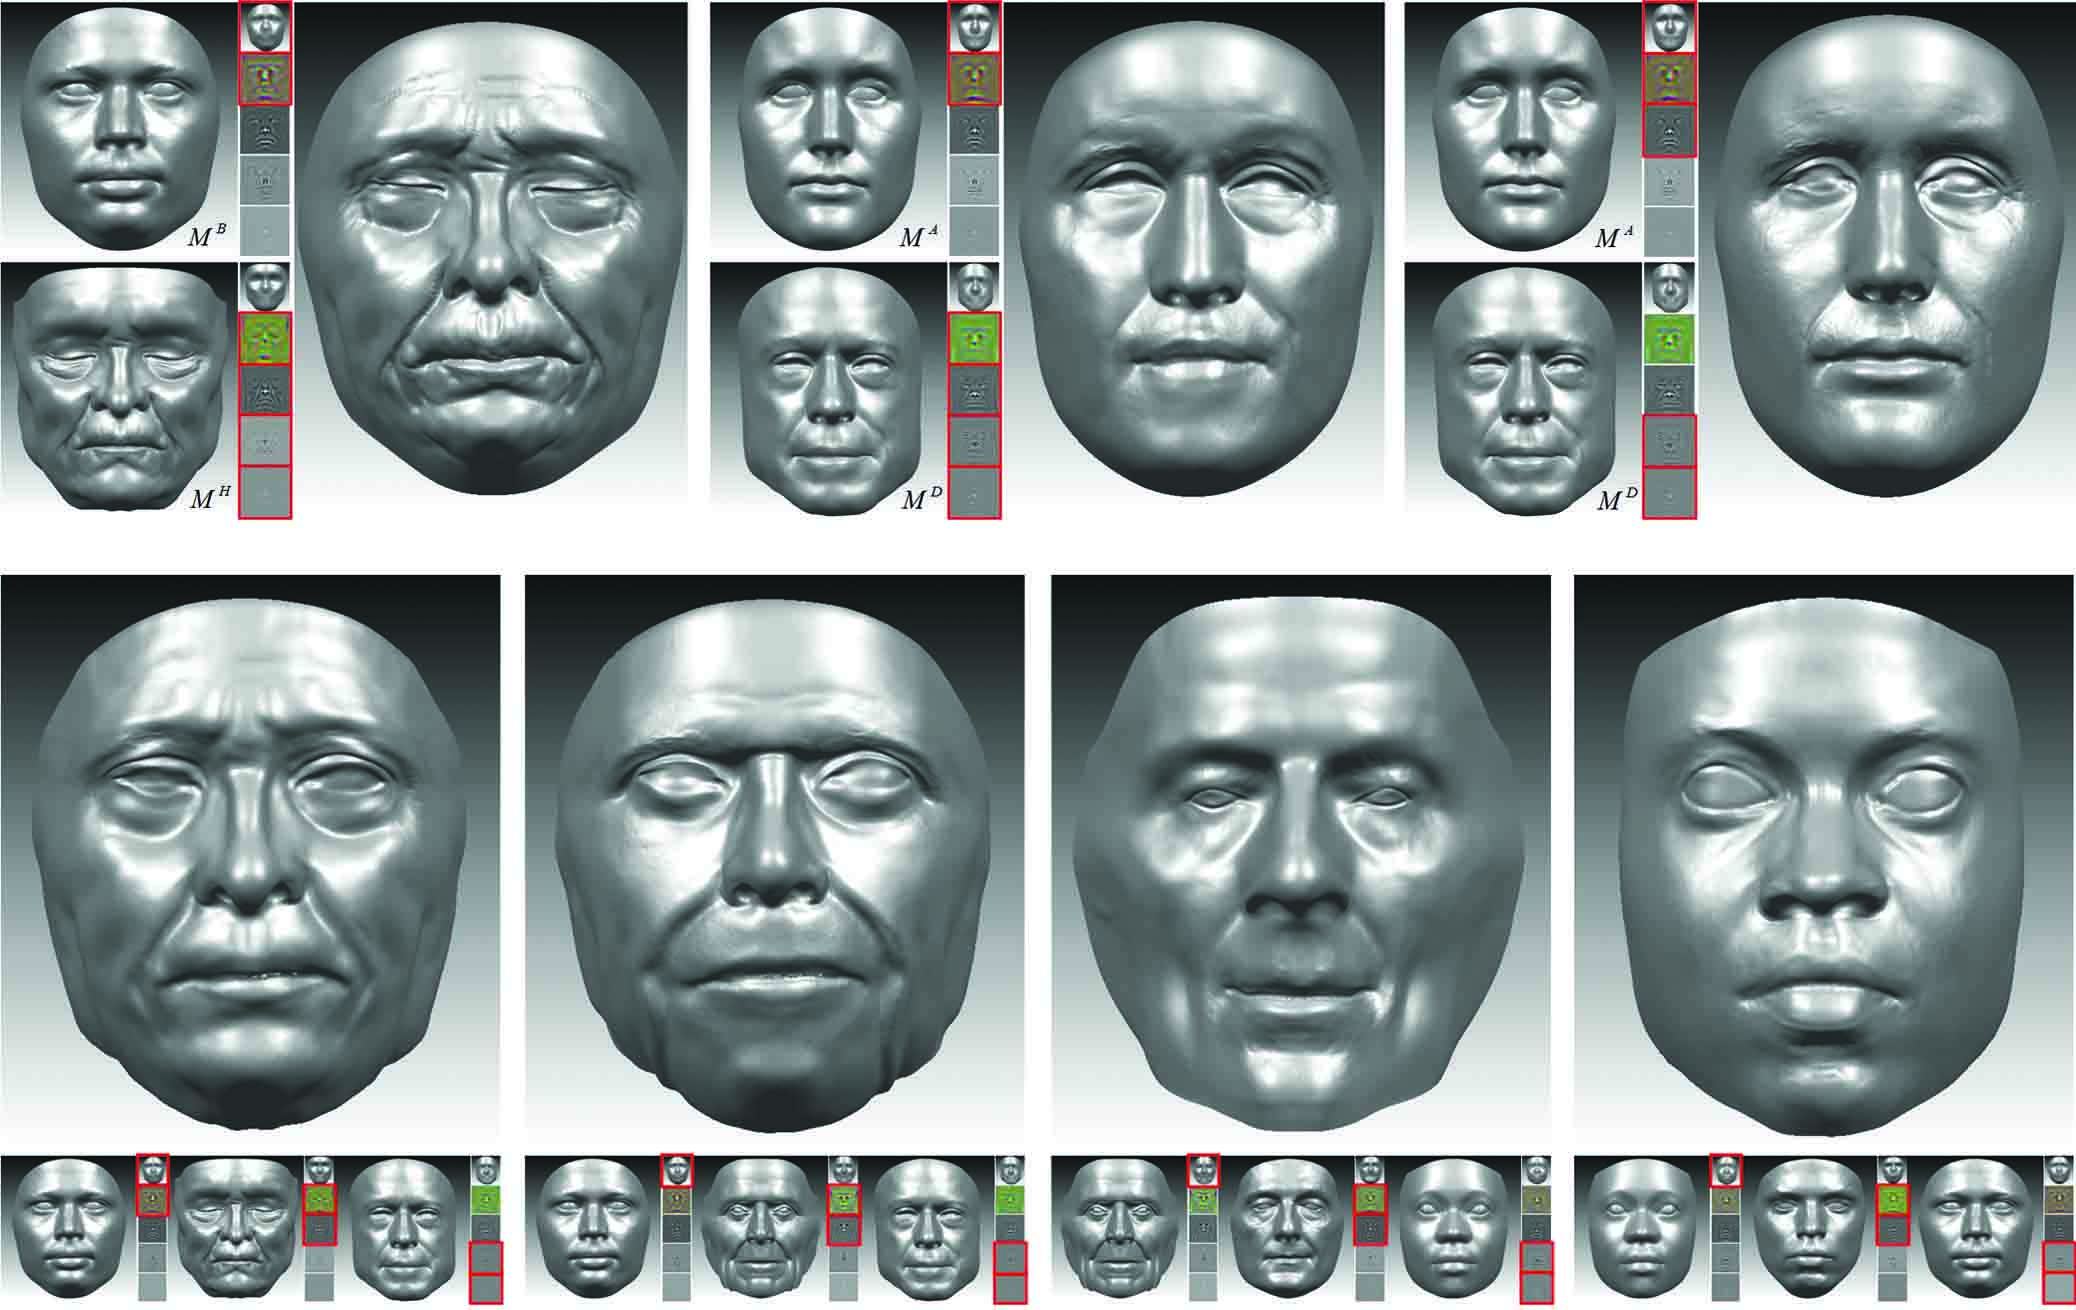 The four larger faces toward the bottom show examples of synthesized face models using weighted blending of three multiscale face models.